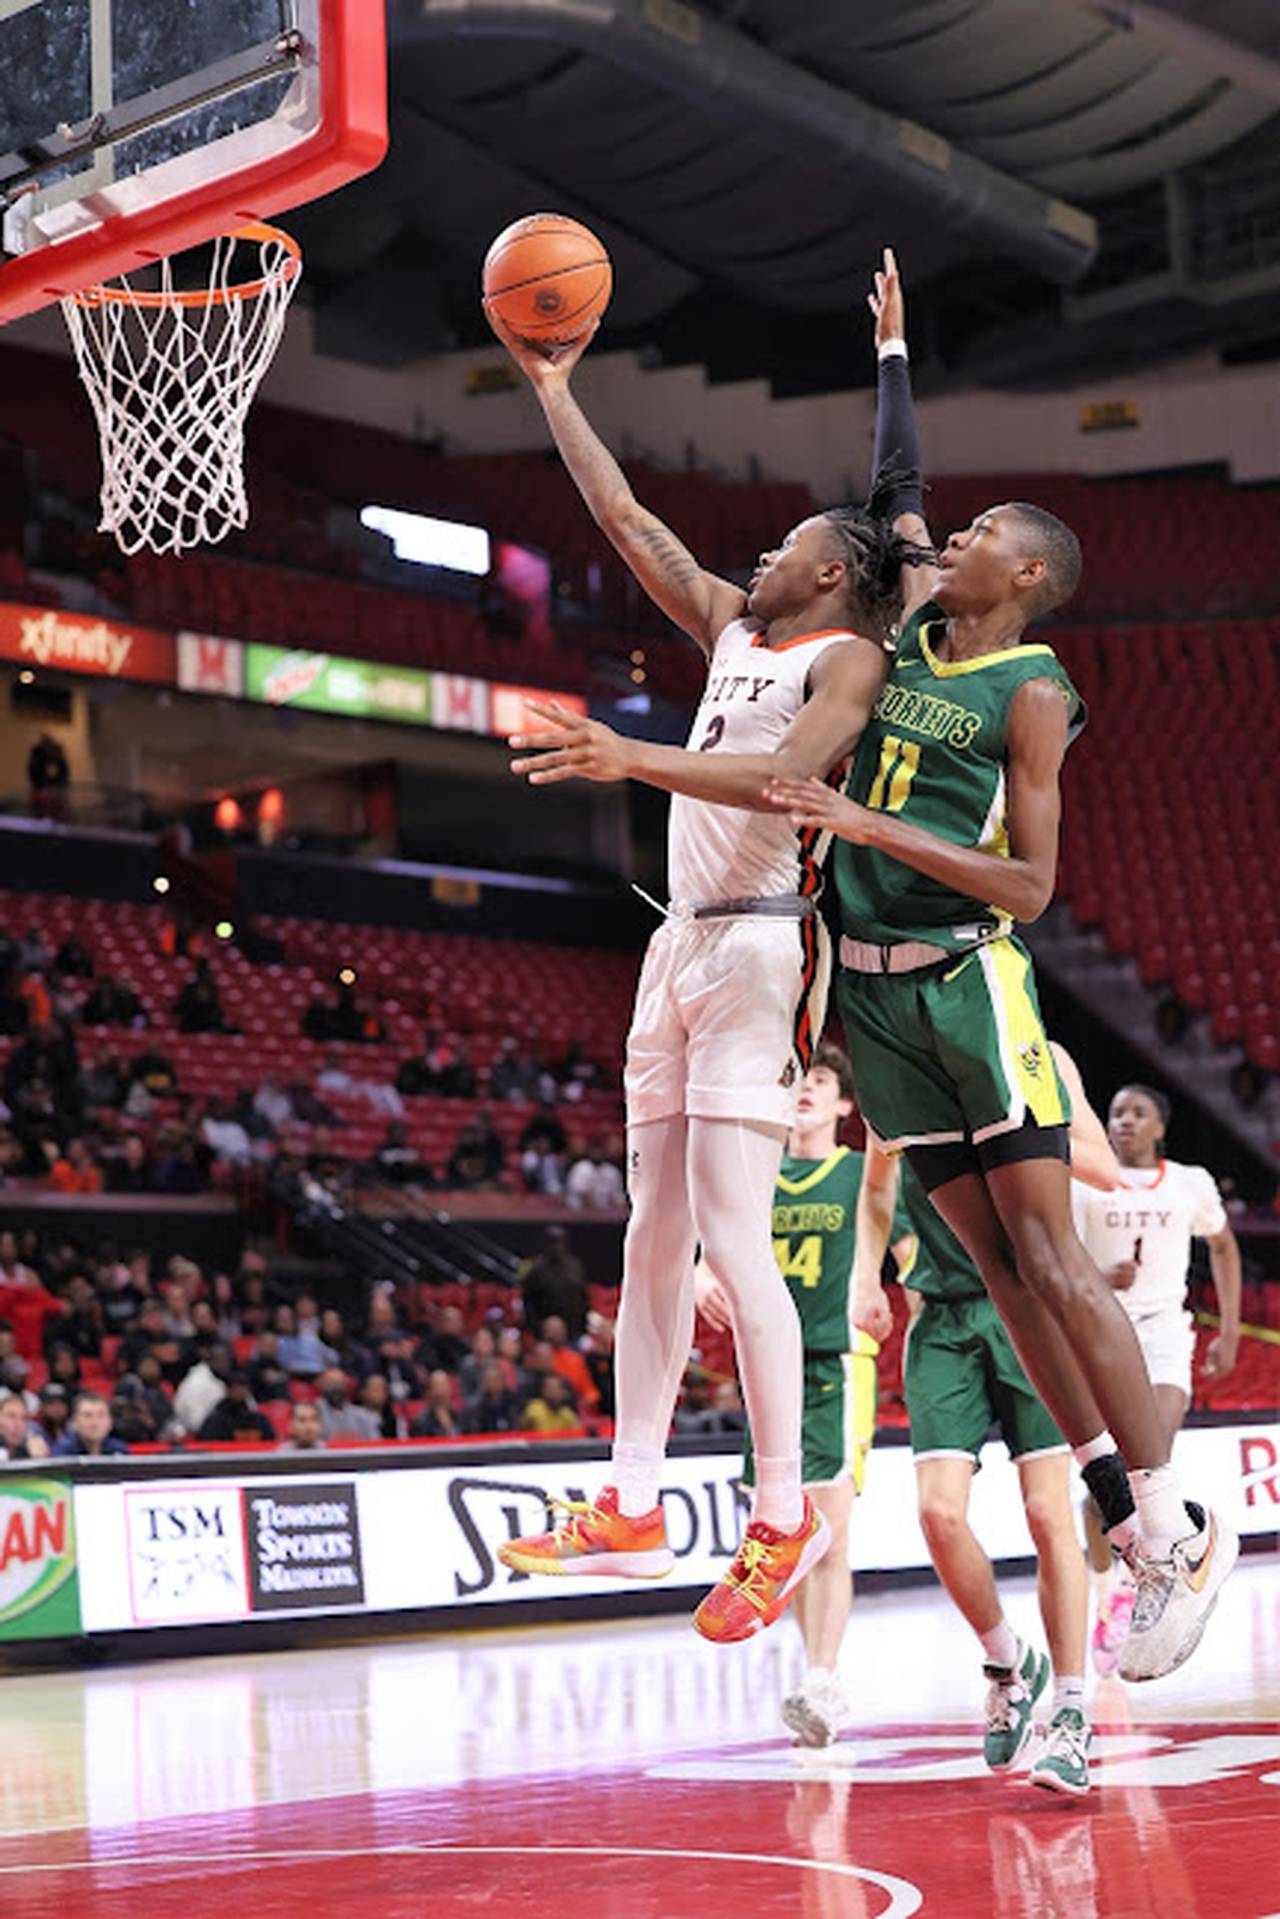 City's Cam Horton goes up for two points as Damascus' Michael Baskerville defends during Thursday's Class 3A state boys basketball championship game at the University of Maryland.